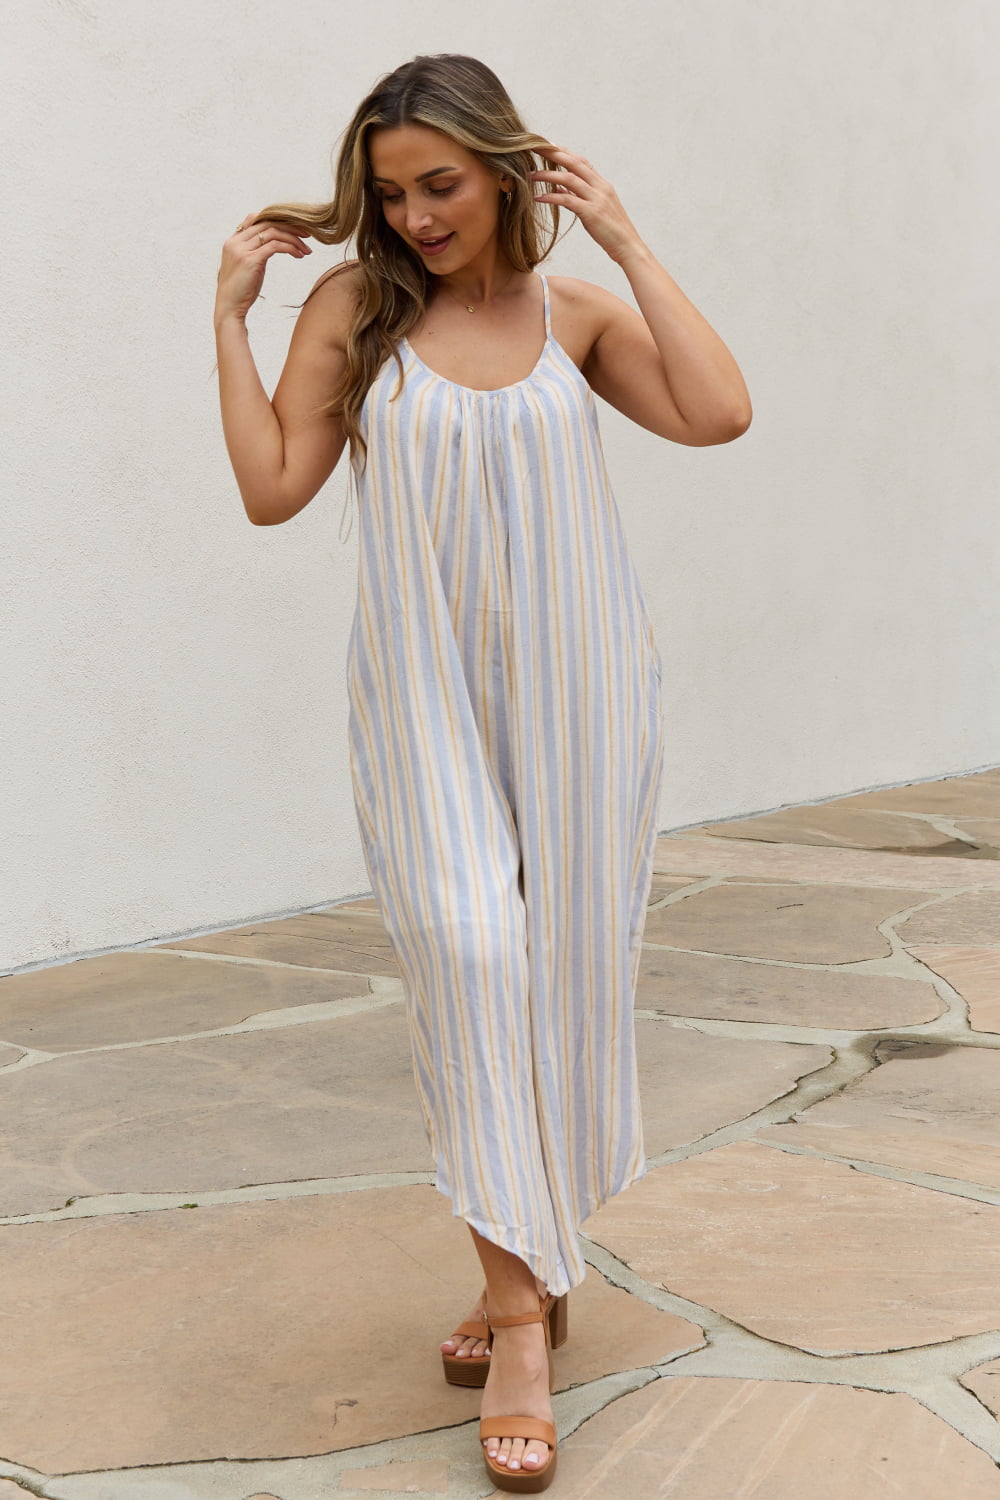 Multi Colored Striped Jumpsuit with Pockets